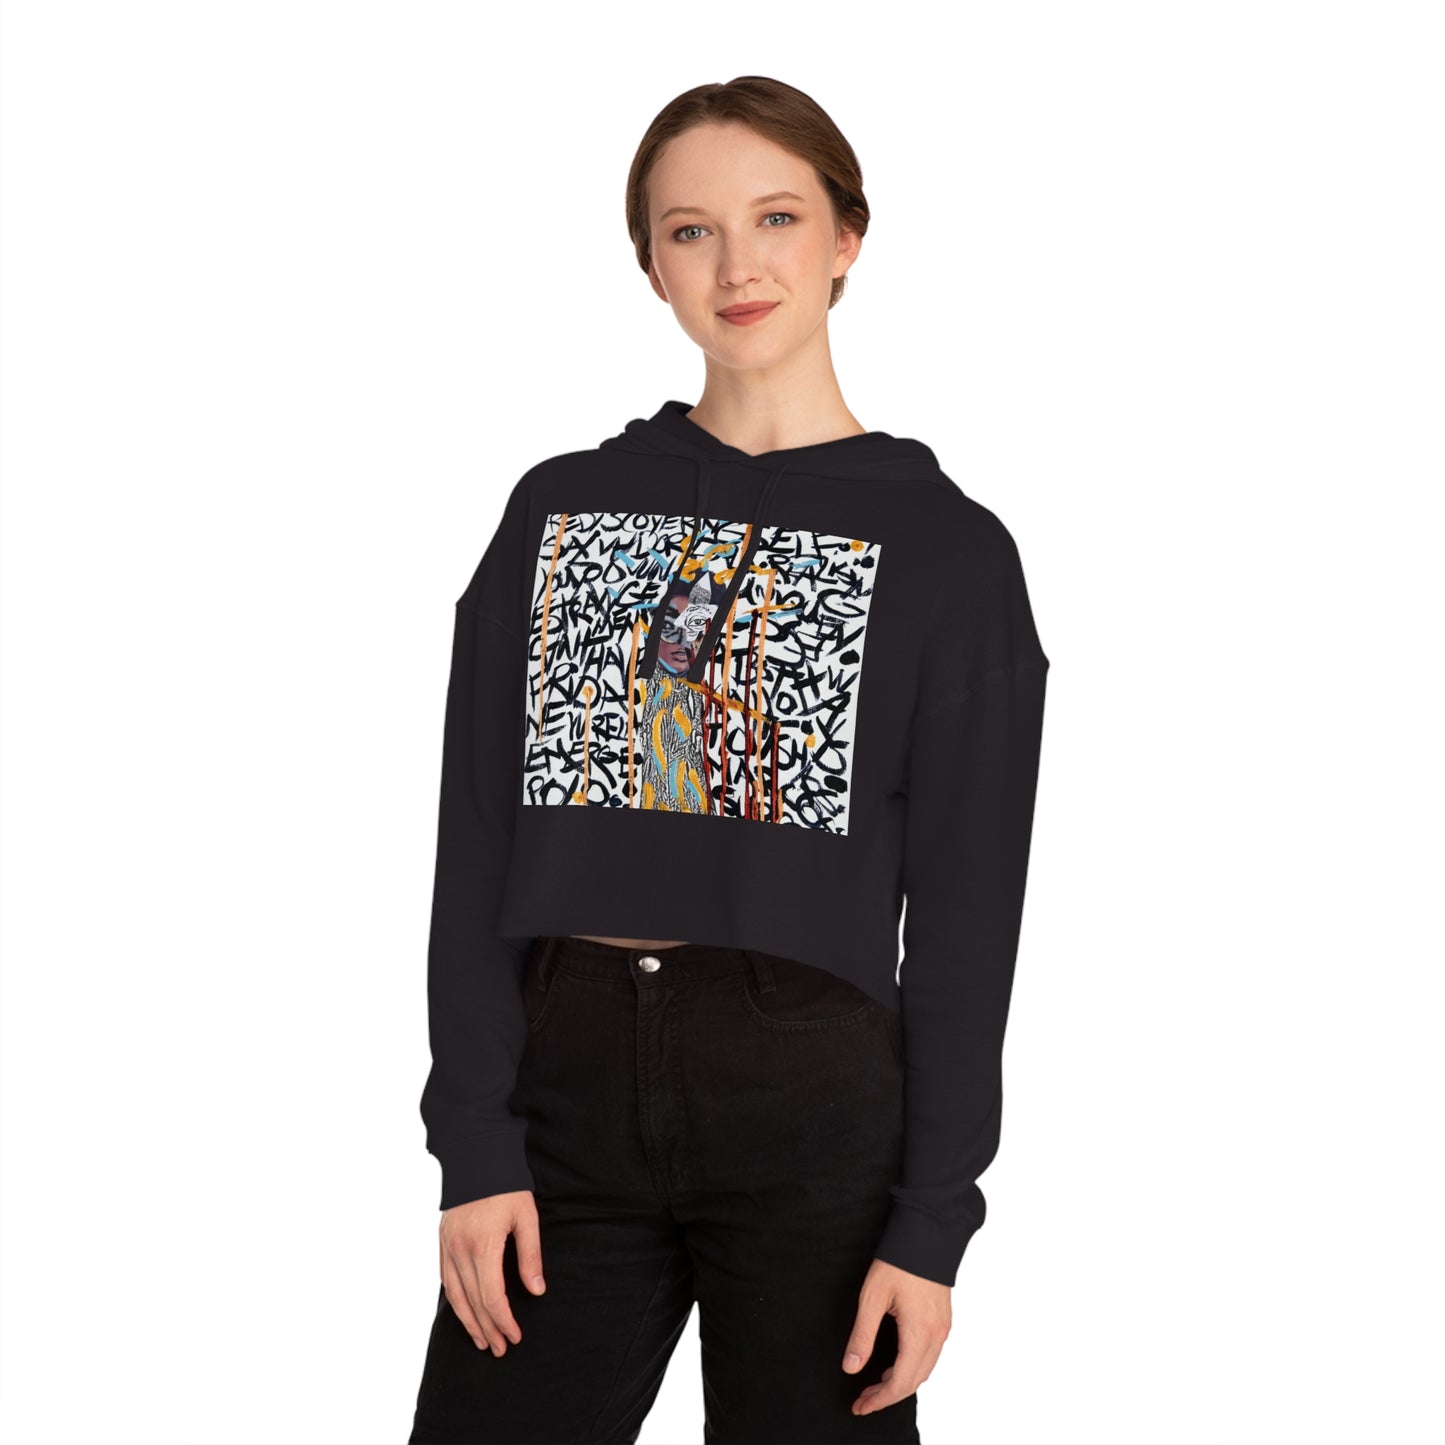 "Magritte by Courtney Minor" Cropped Hooded Sweatshirt